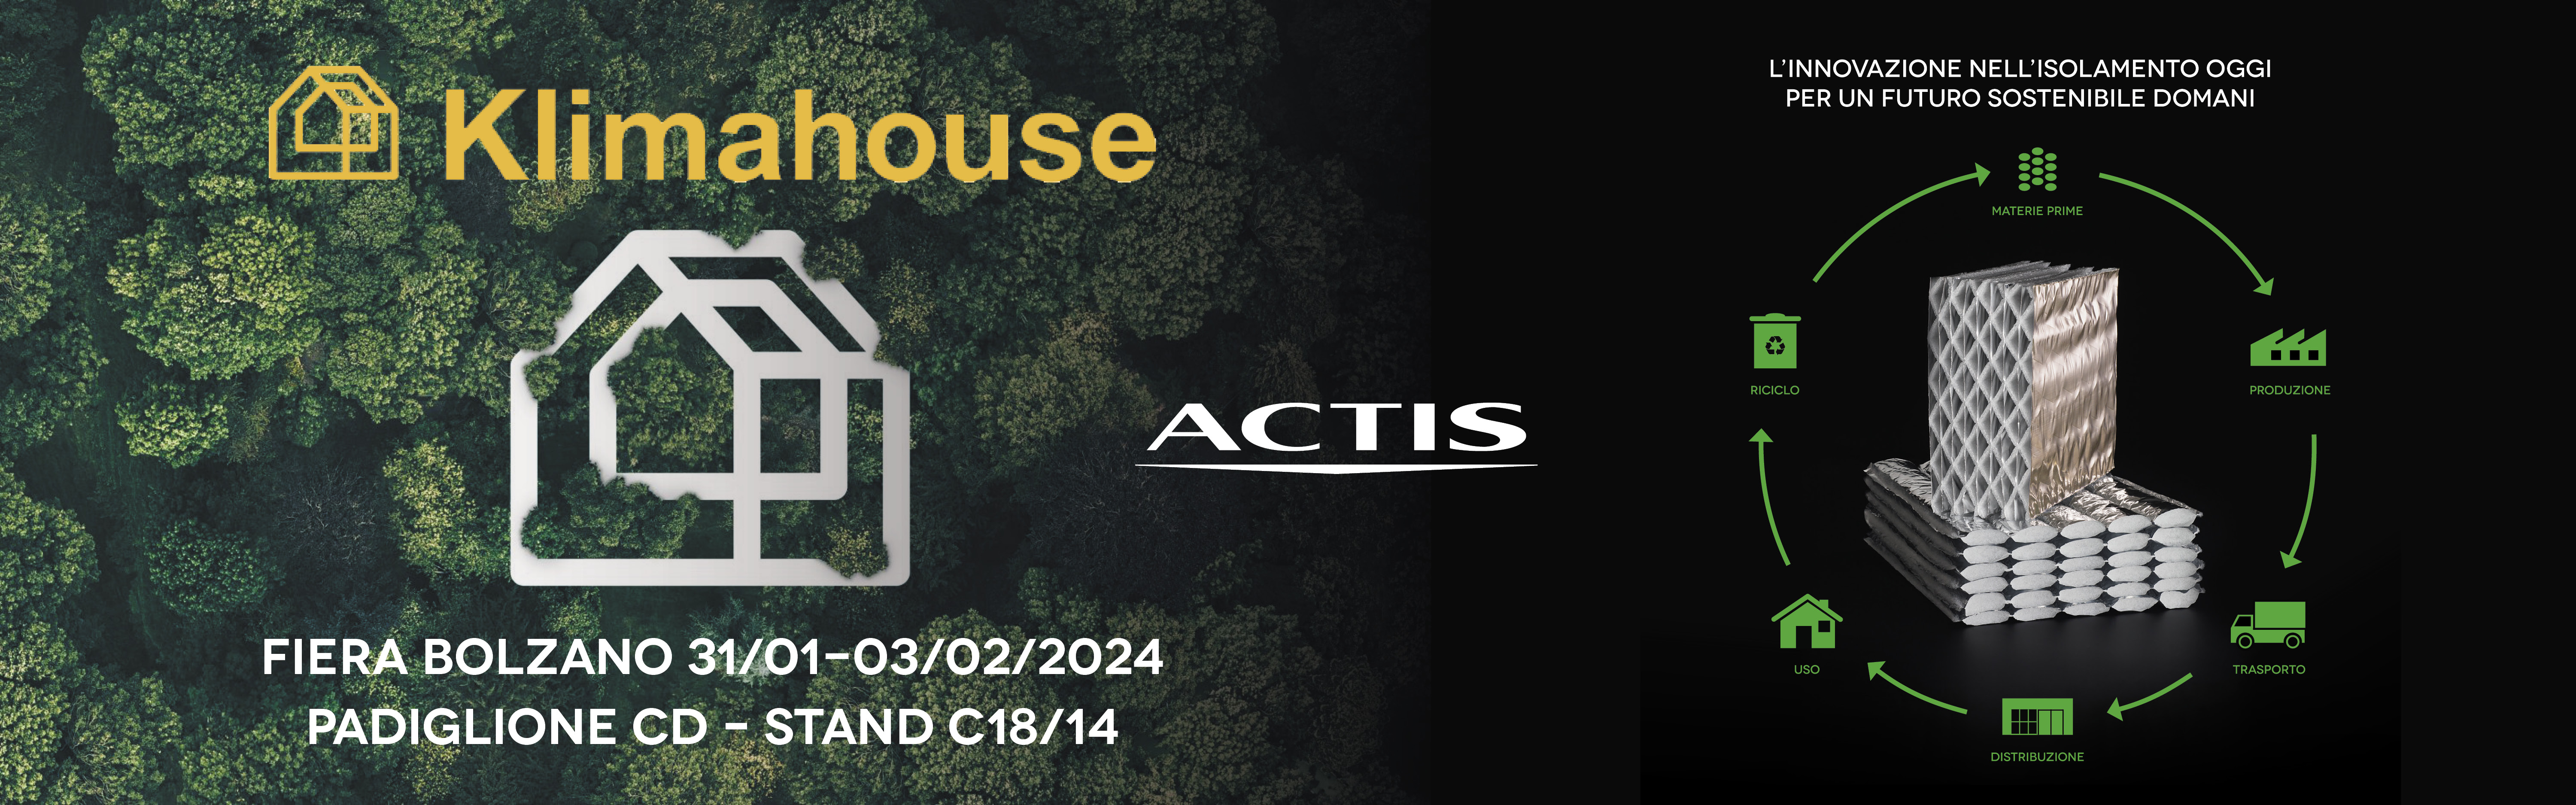 ACTIS A KLIMAHOUSE 2024